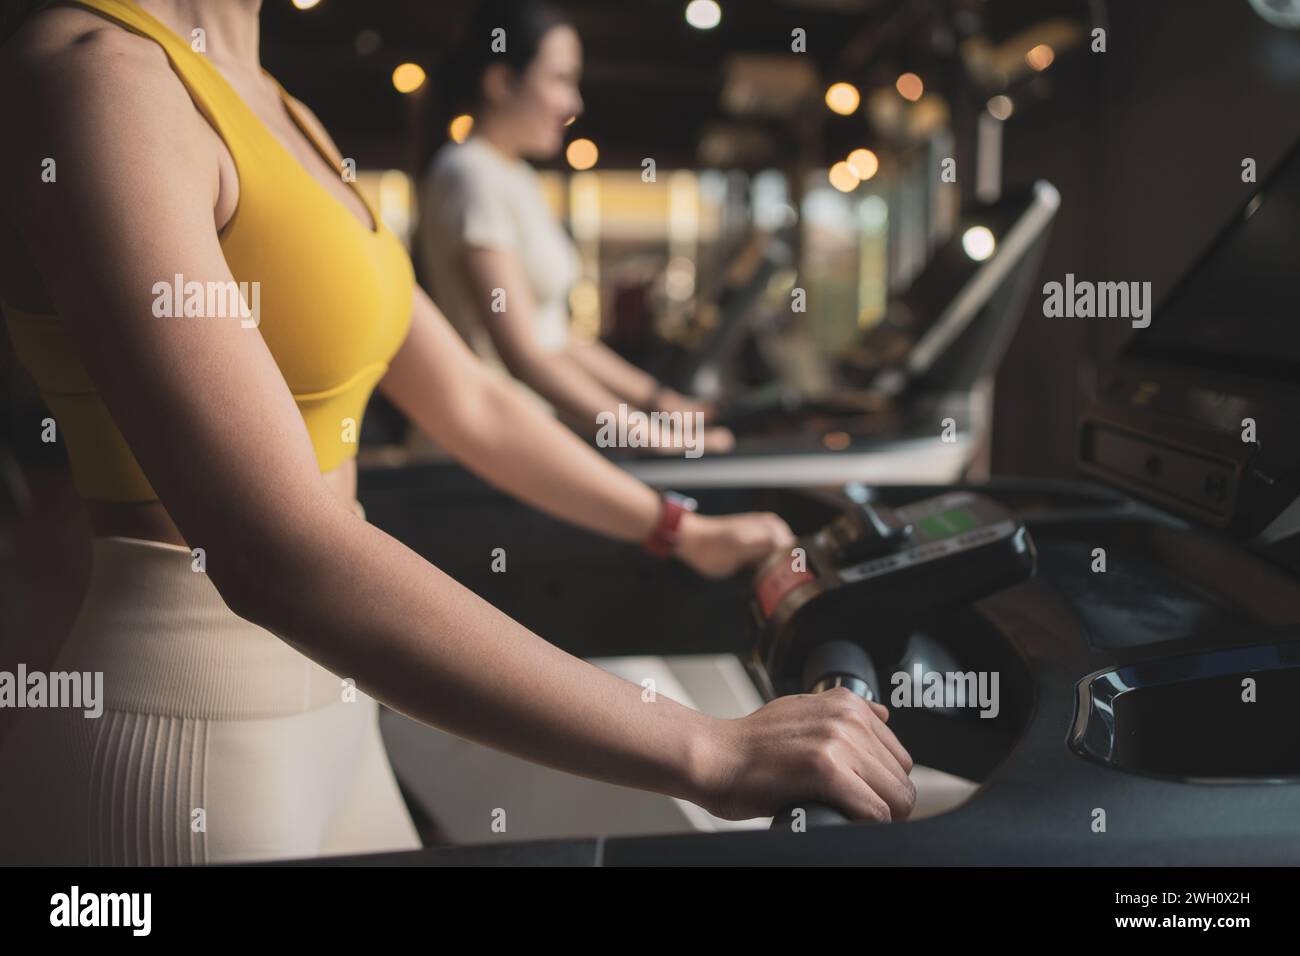 Two young woman are jogging on treadmill during her sports training in a gym. Stock Photo